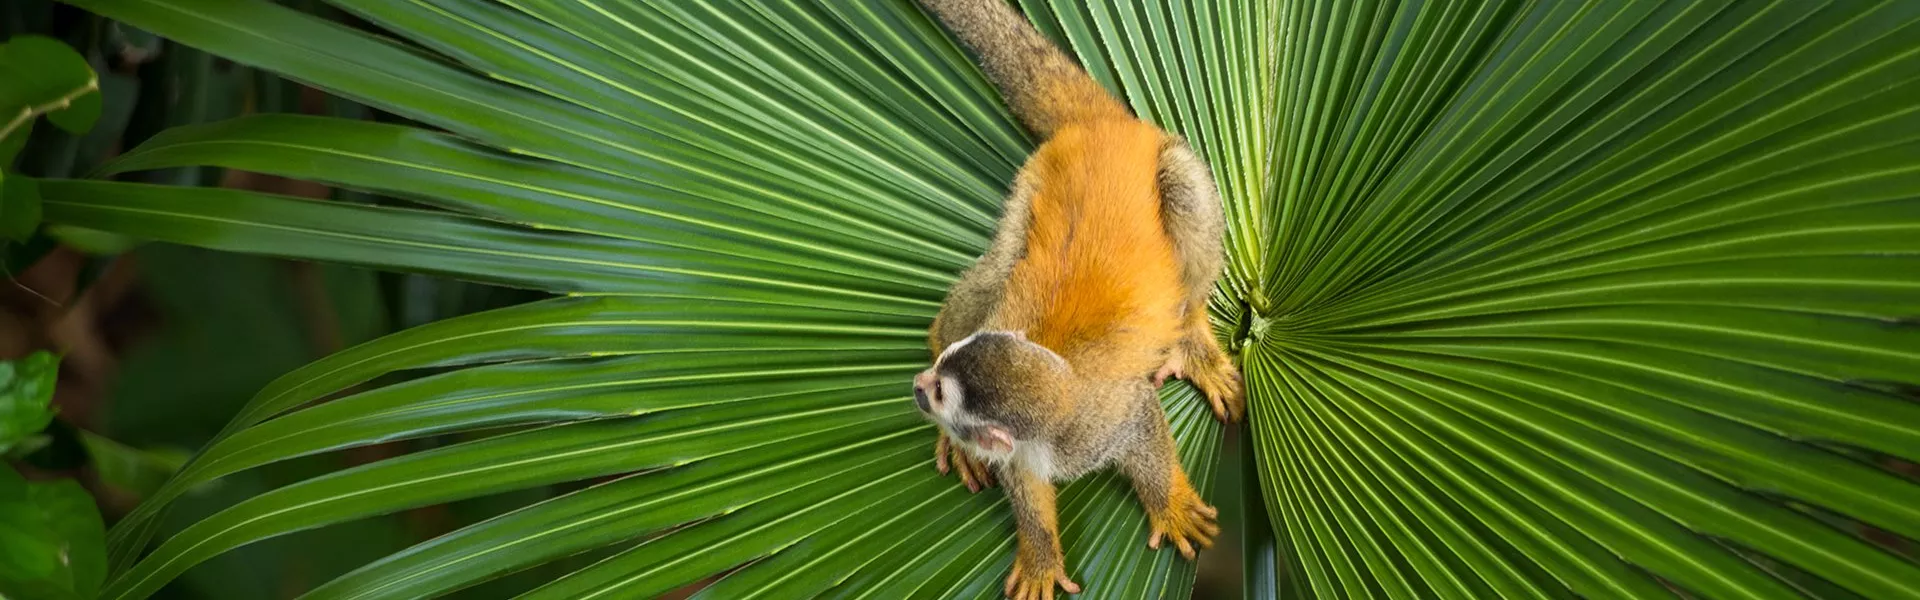 A squirrel monkey climbing up a palm tree 